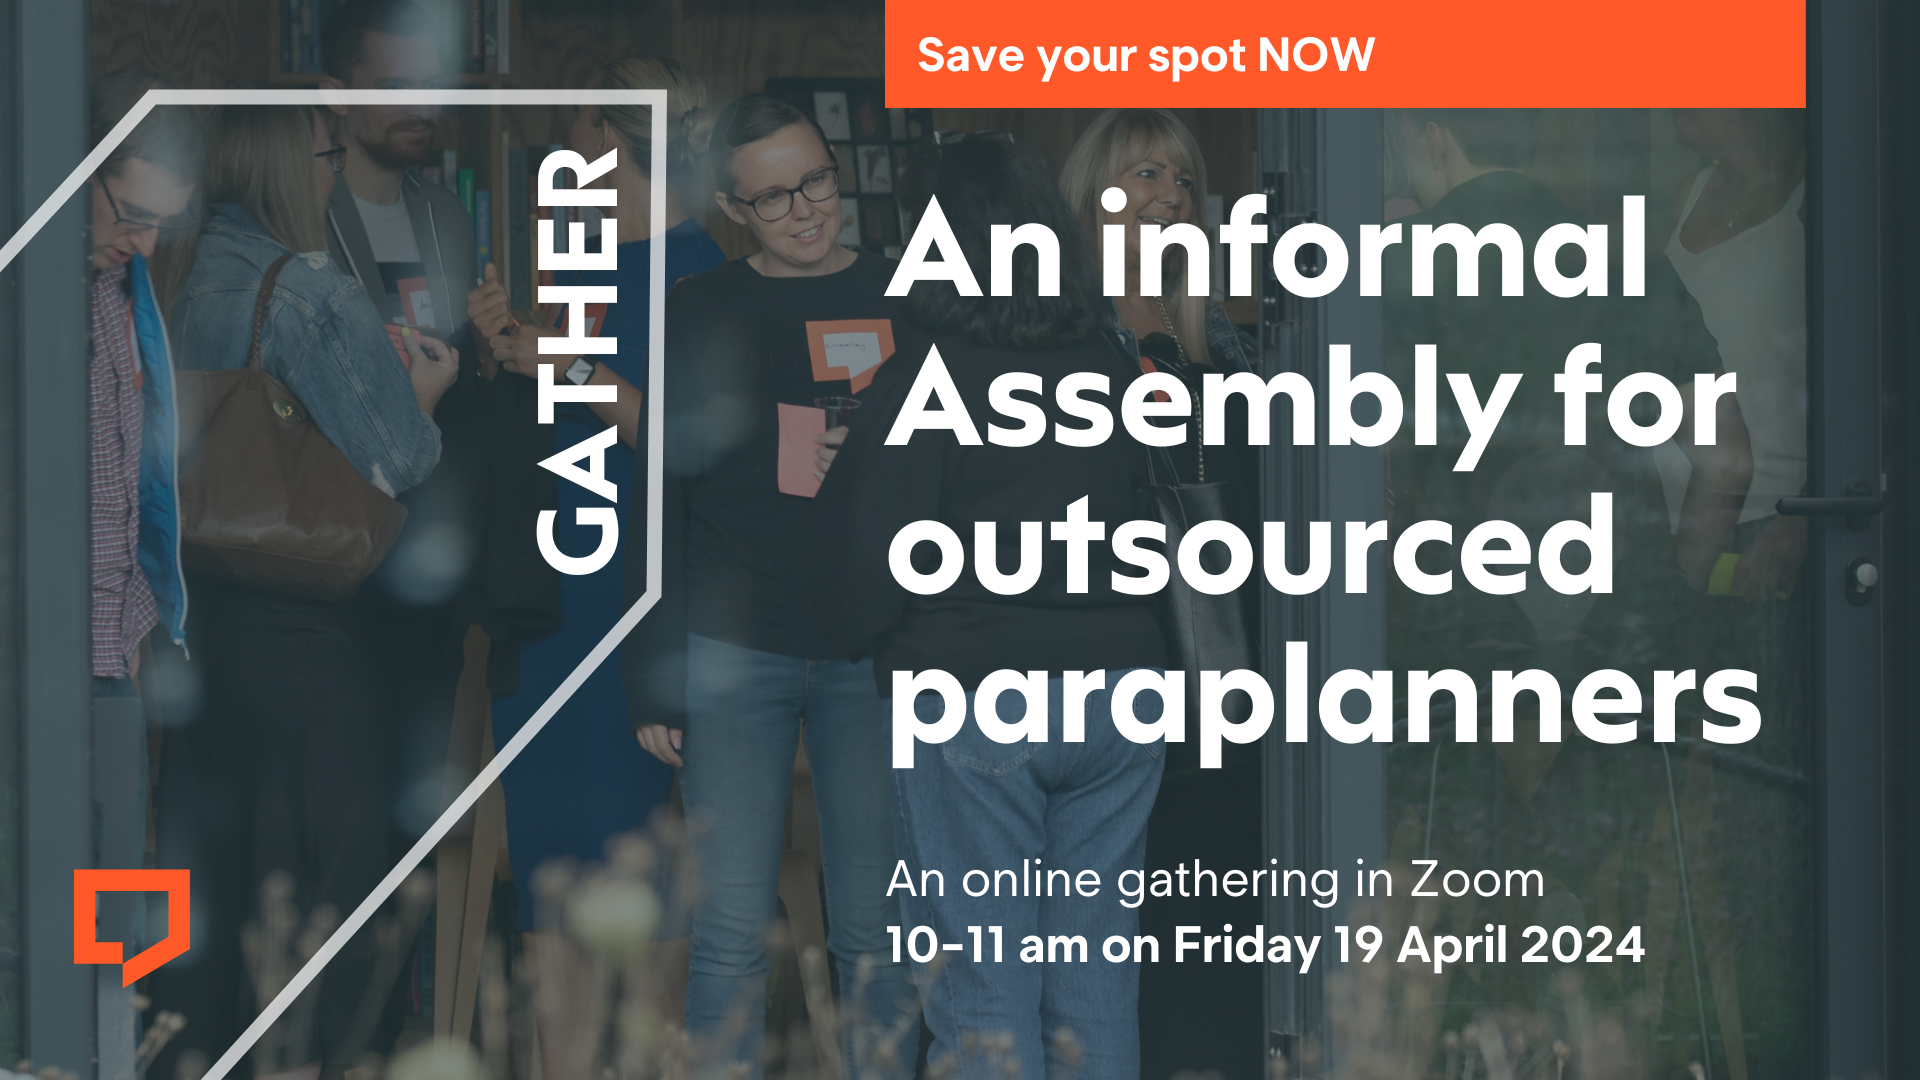 Save your spot now. An informal Assembly for outsourced paraplanners. An online gathering in Zoom. 10-11 am on Friday 19 April 2024